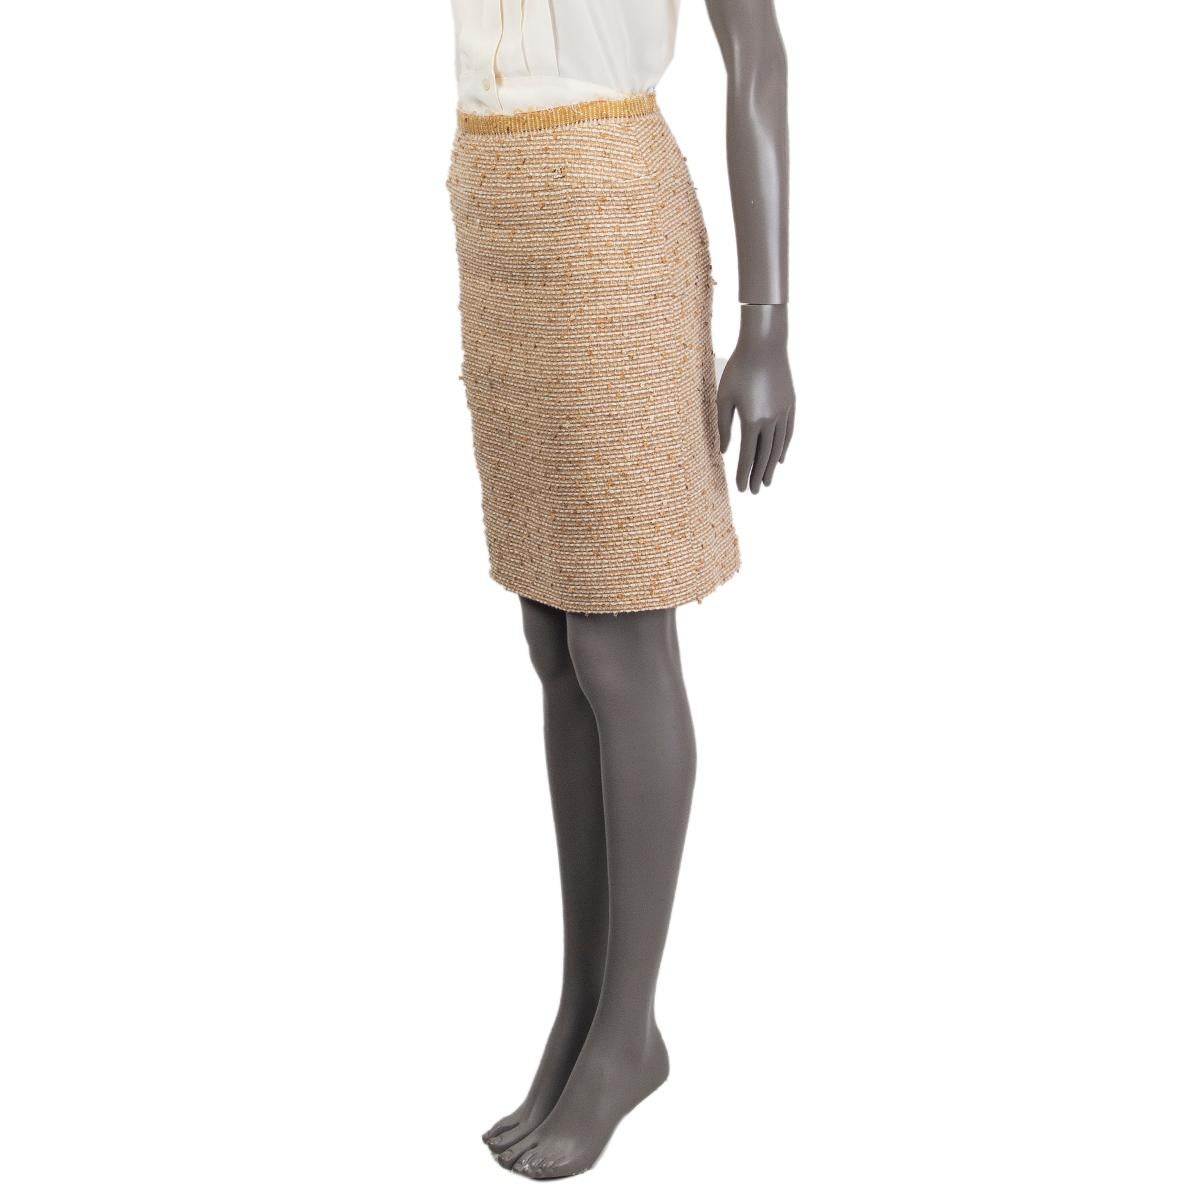 Chanel straight tweed skirt in beige, off-white and oatmeal wool (27%), linen (22%), polyester (21%), silk (12%),nylon (8%), acrylic (7%) and cotton (3%) with sequins. Opens with a zipper in the back. Lined in silk (100%). Has been worn and is in